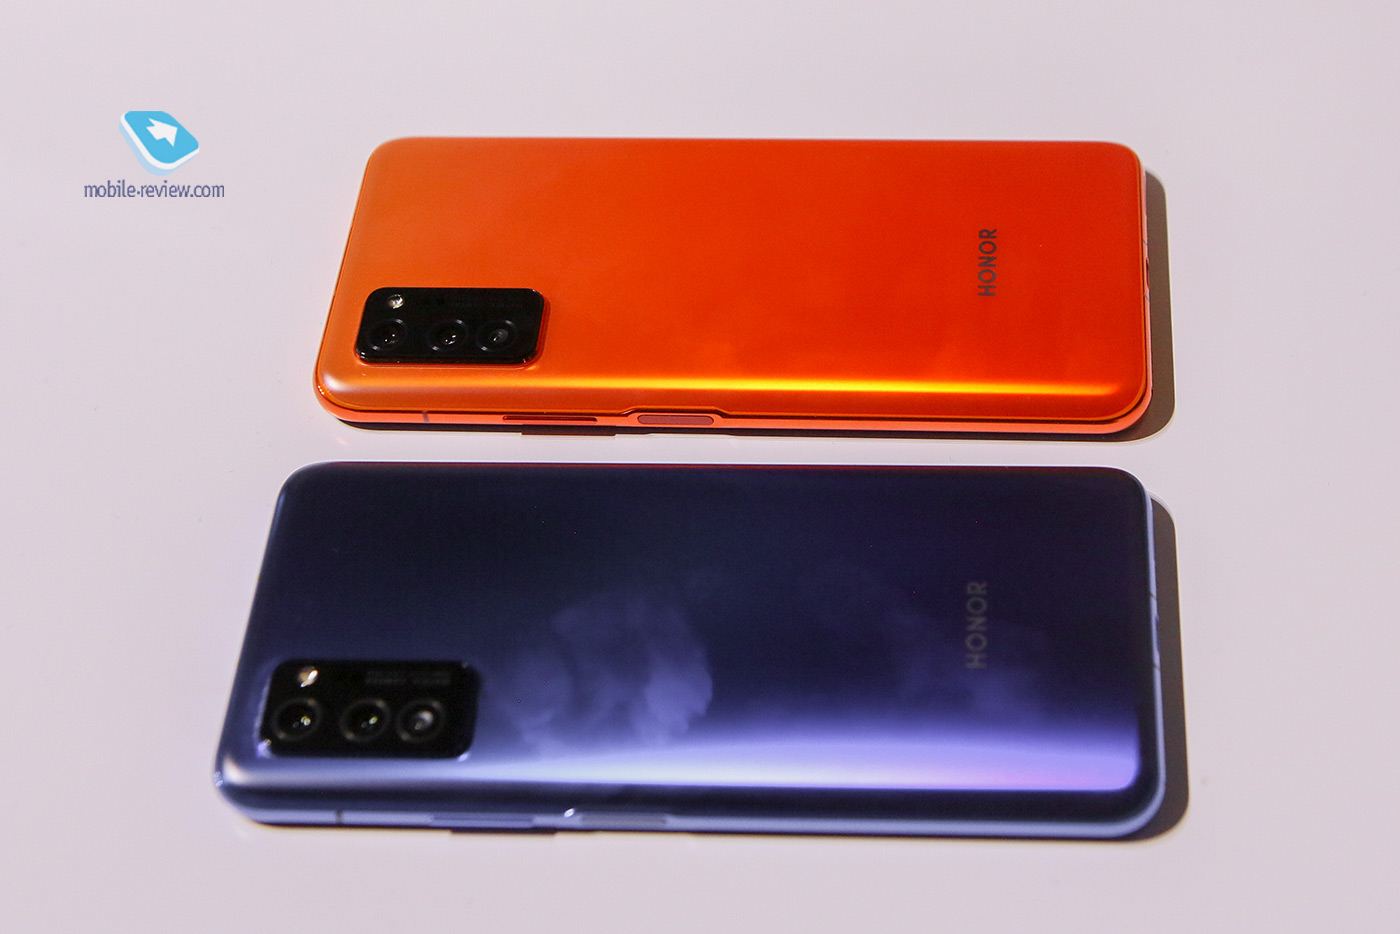 Announcements from Honor: Honor V30, ammiraglia Honor, laptop MagicBook, MagicWatch 2